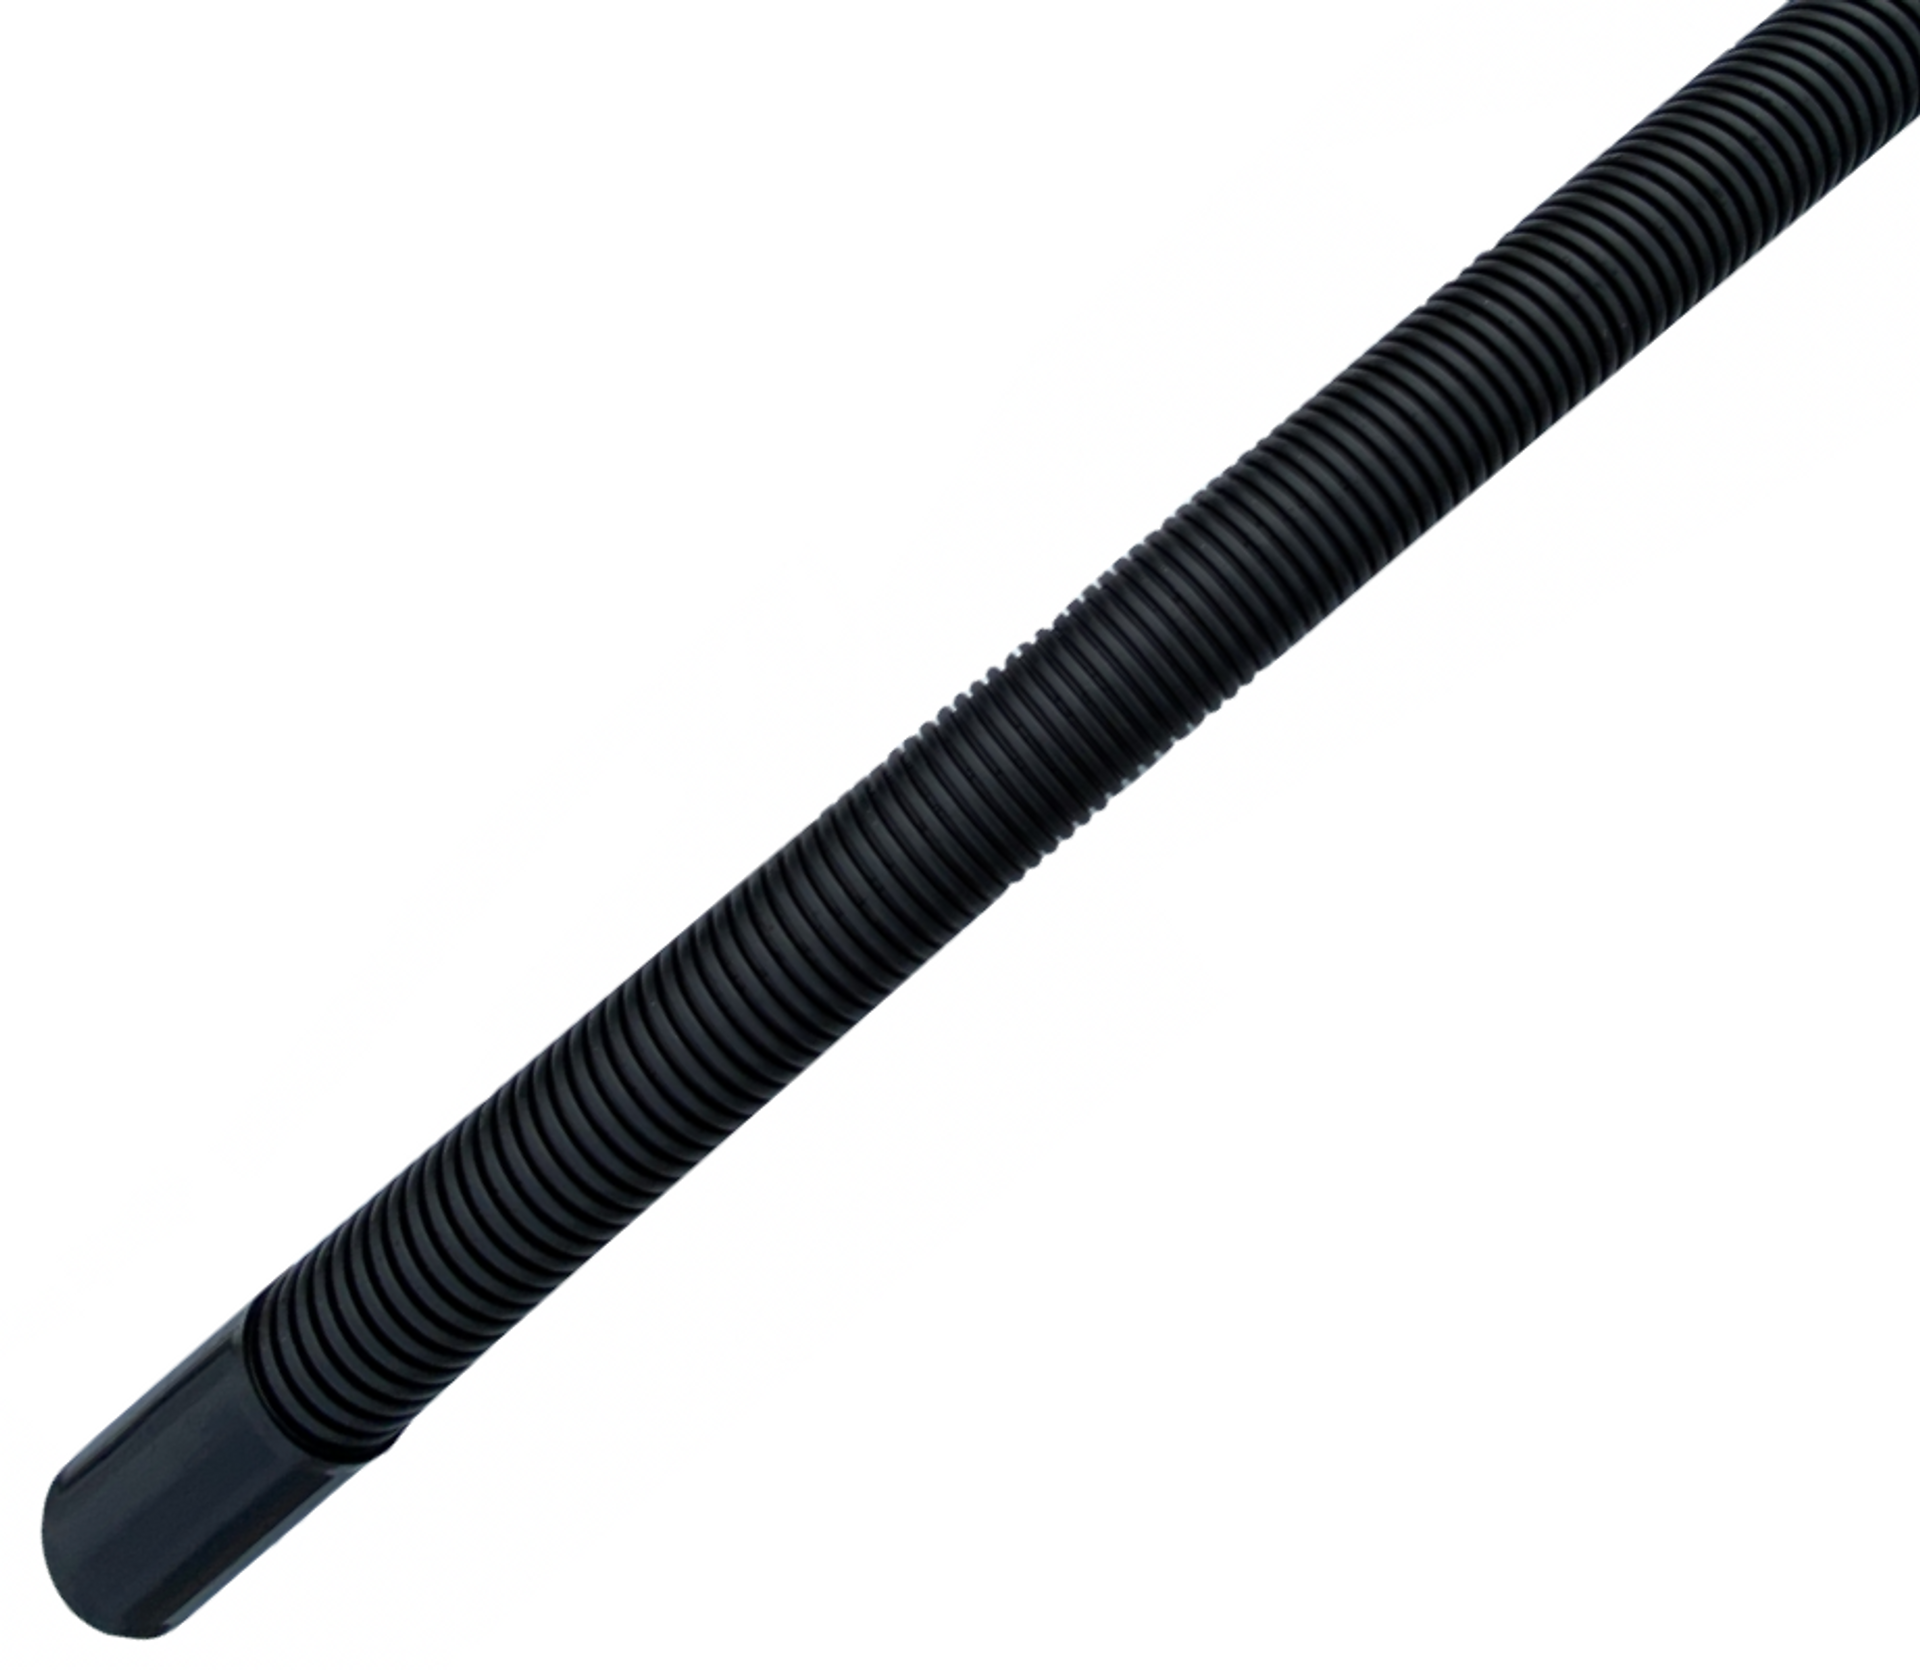 Bend for Corrugated Cable Protection Pipe Kaczmarek PE-LD Flexible Black